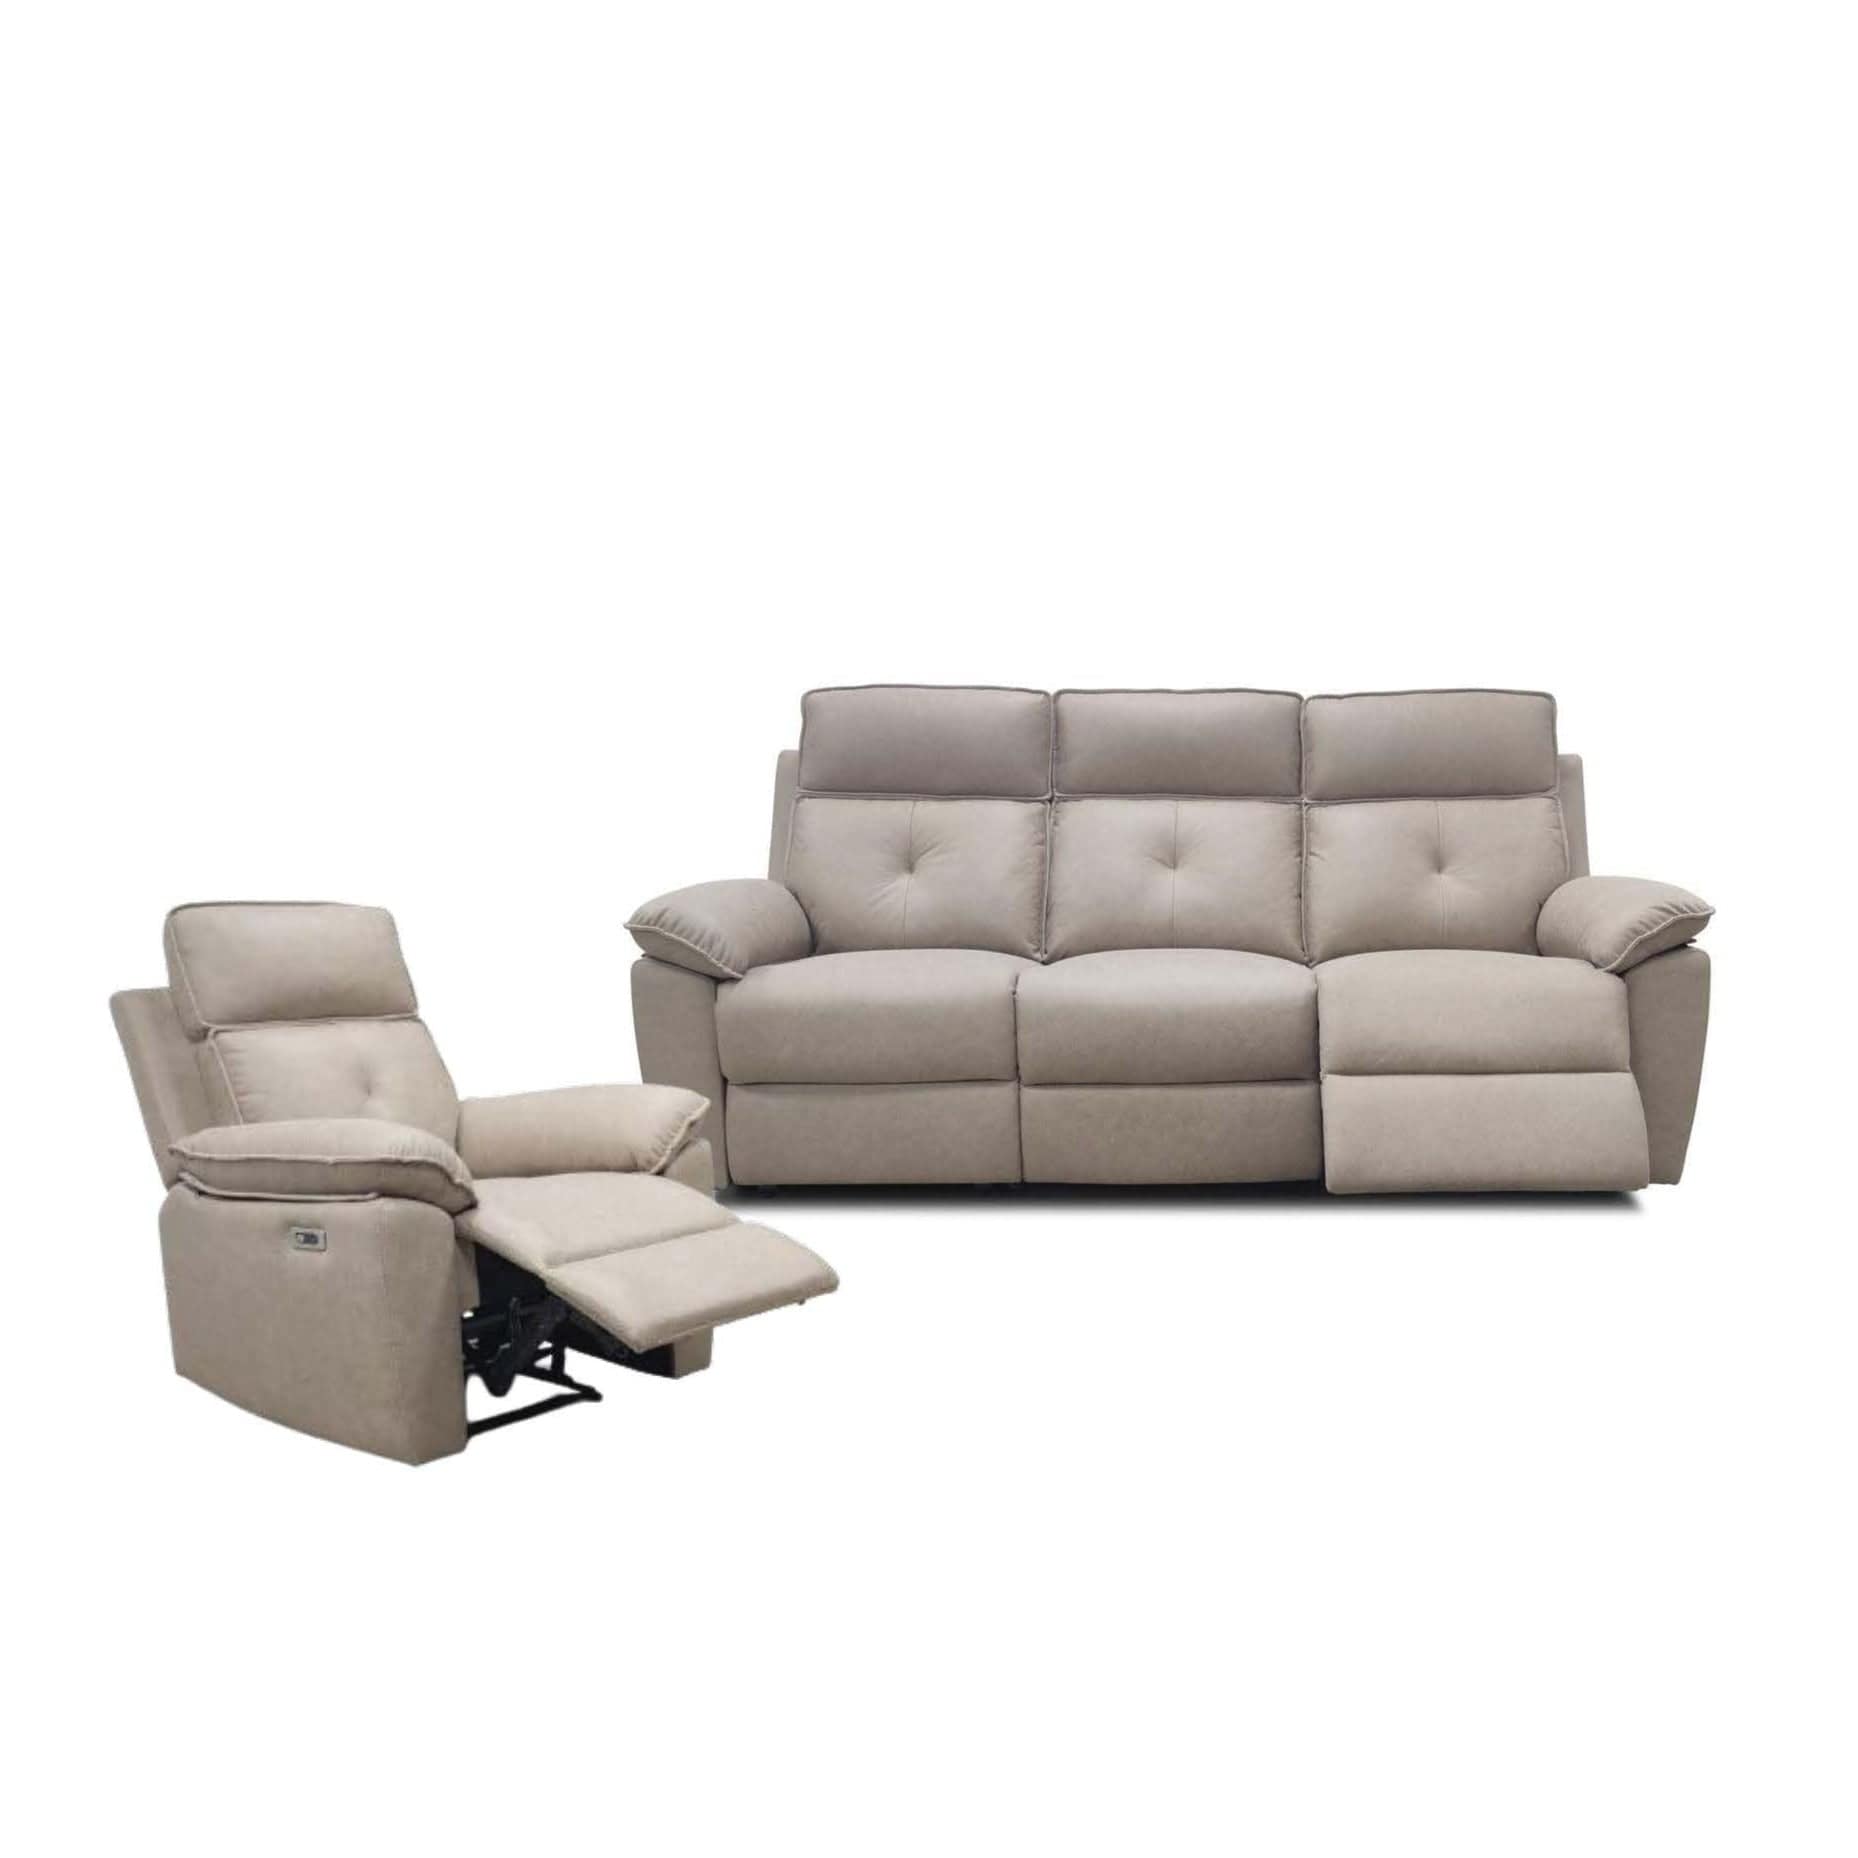 Americana Fabric Electric Recliner Sofa 1/2/3-Seater RC0750 (I) picket and rail